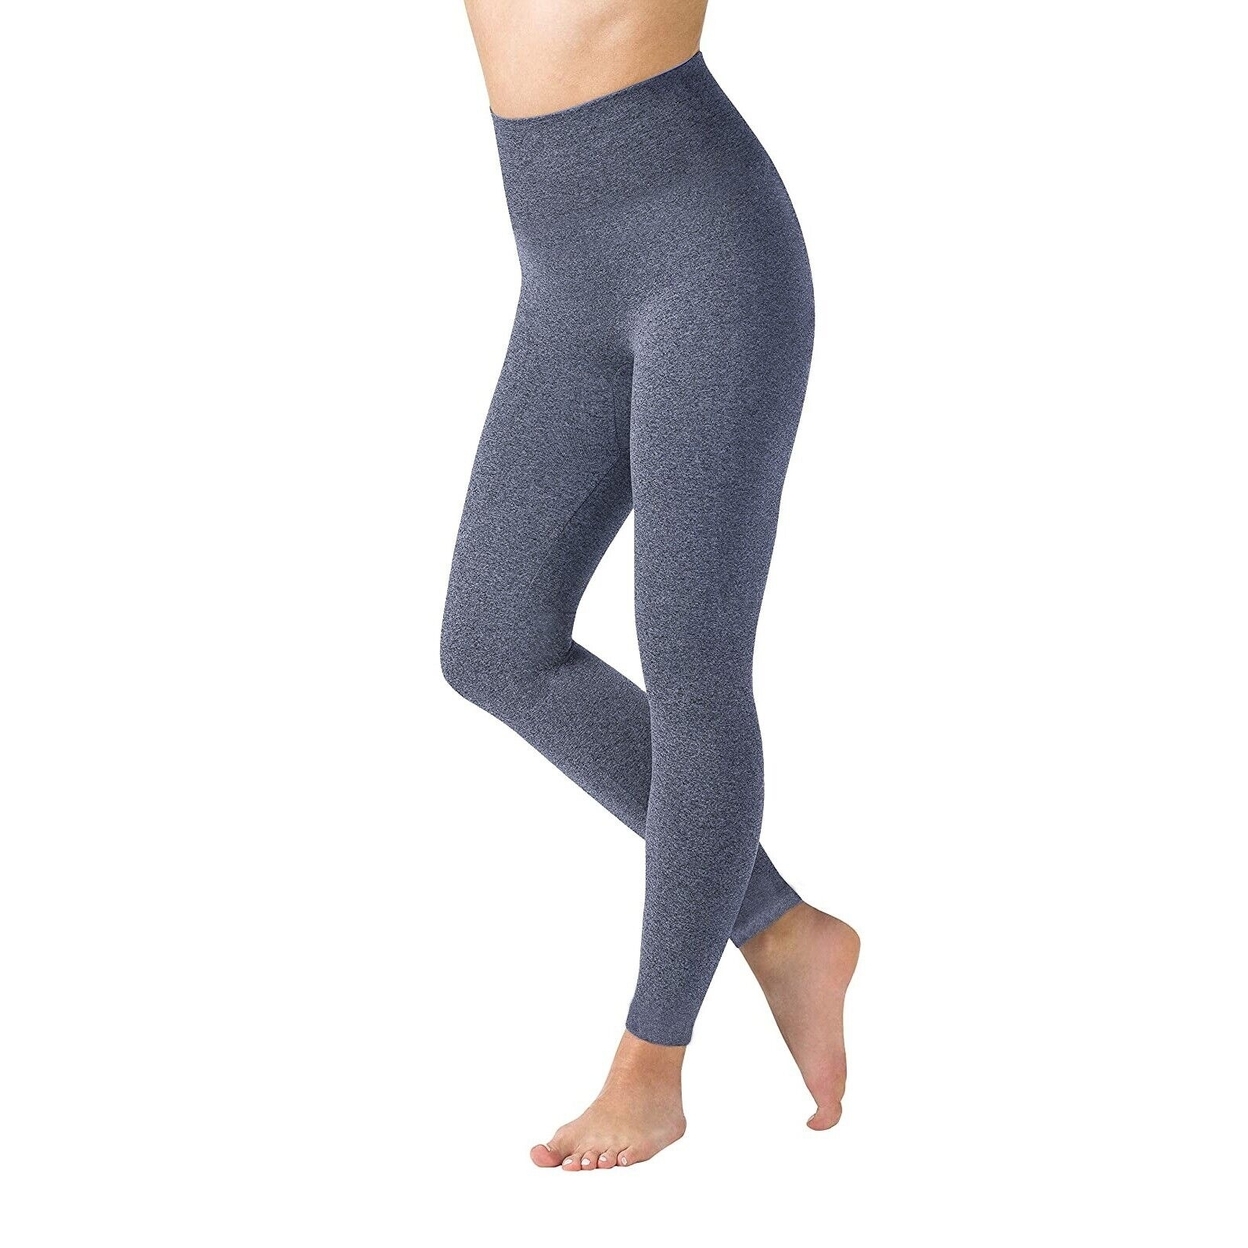 Multi-Packs Women High Waisted Fleece Lined Marled Leggings Ultra Soft Warm Pant - Charcoal/navy, 1, Small